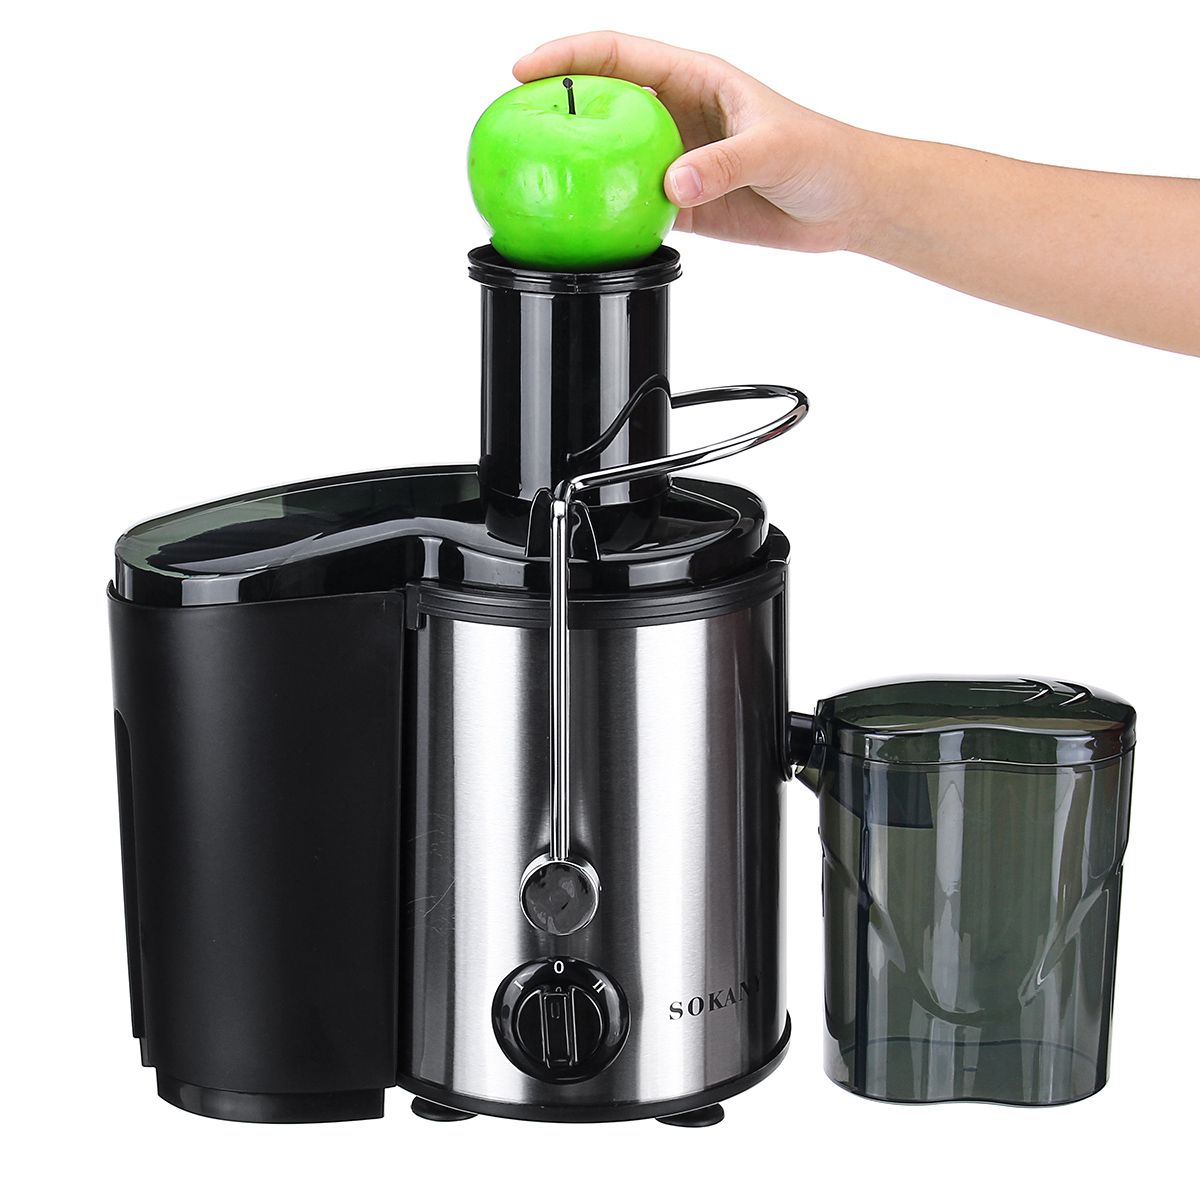 800W-Electric-Juicer-Whole-Fruit-Vegetable-Food-Blender-Mixer-Extractor-Machine-1554668